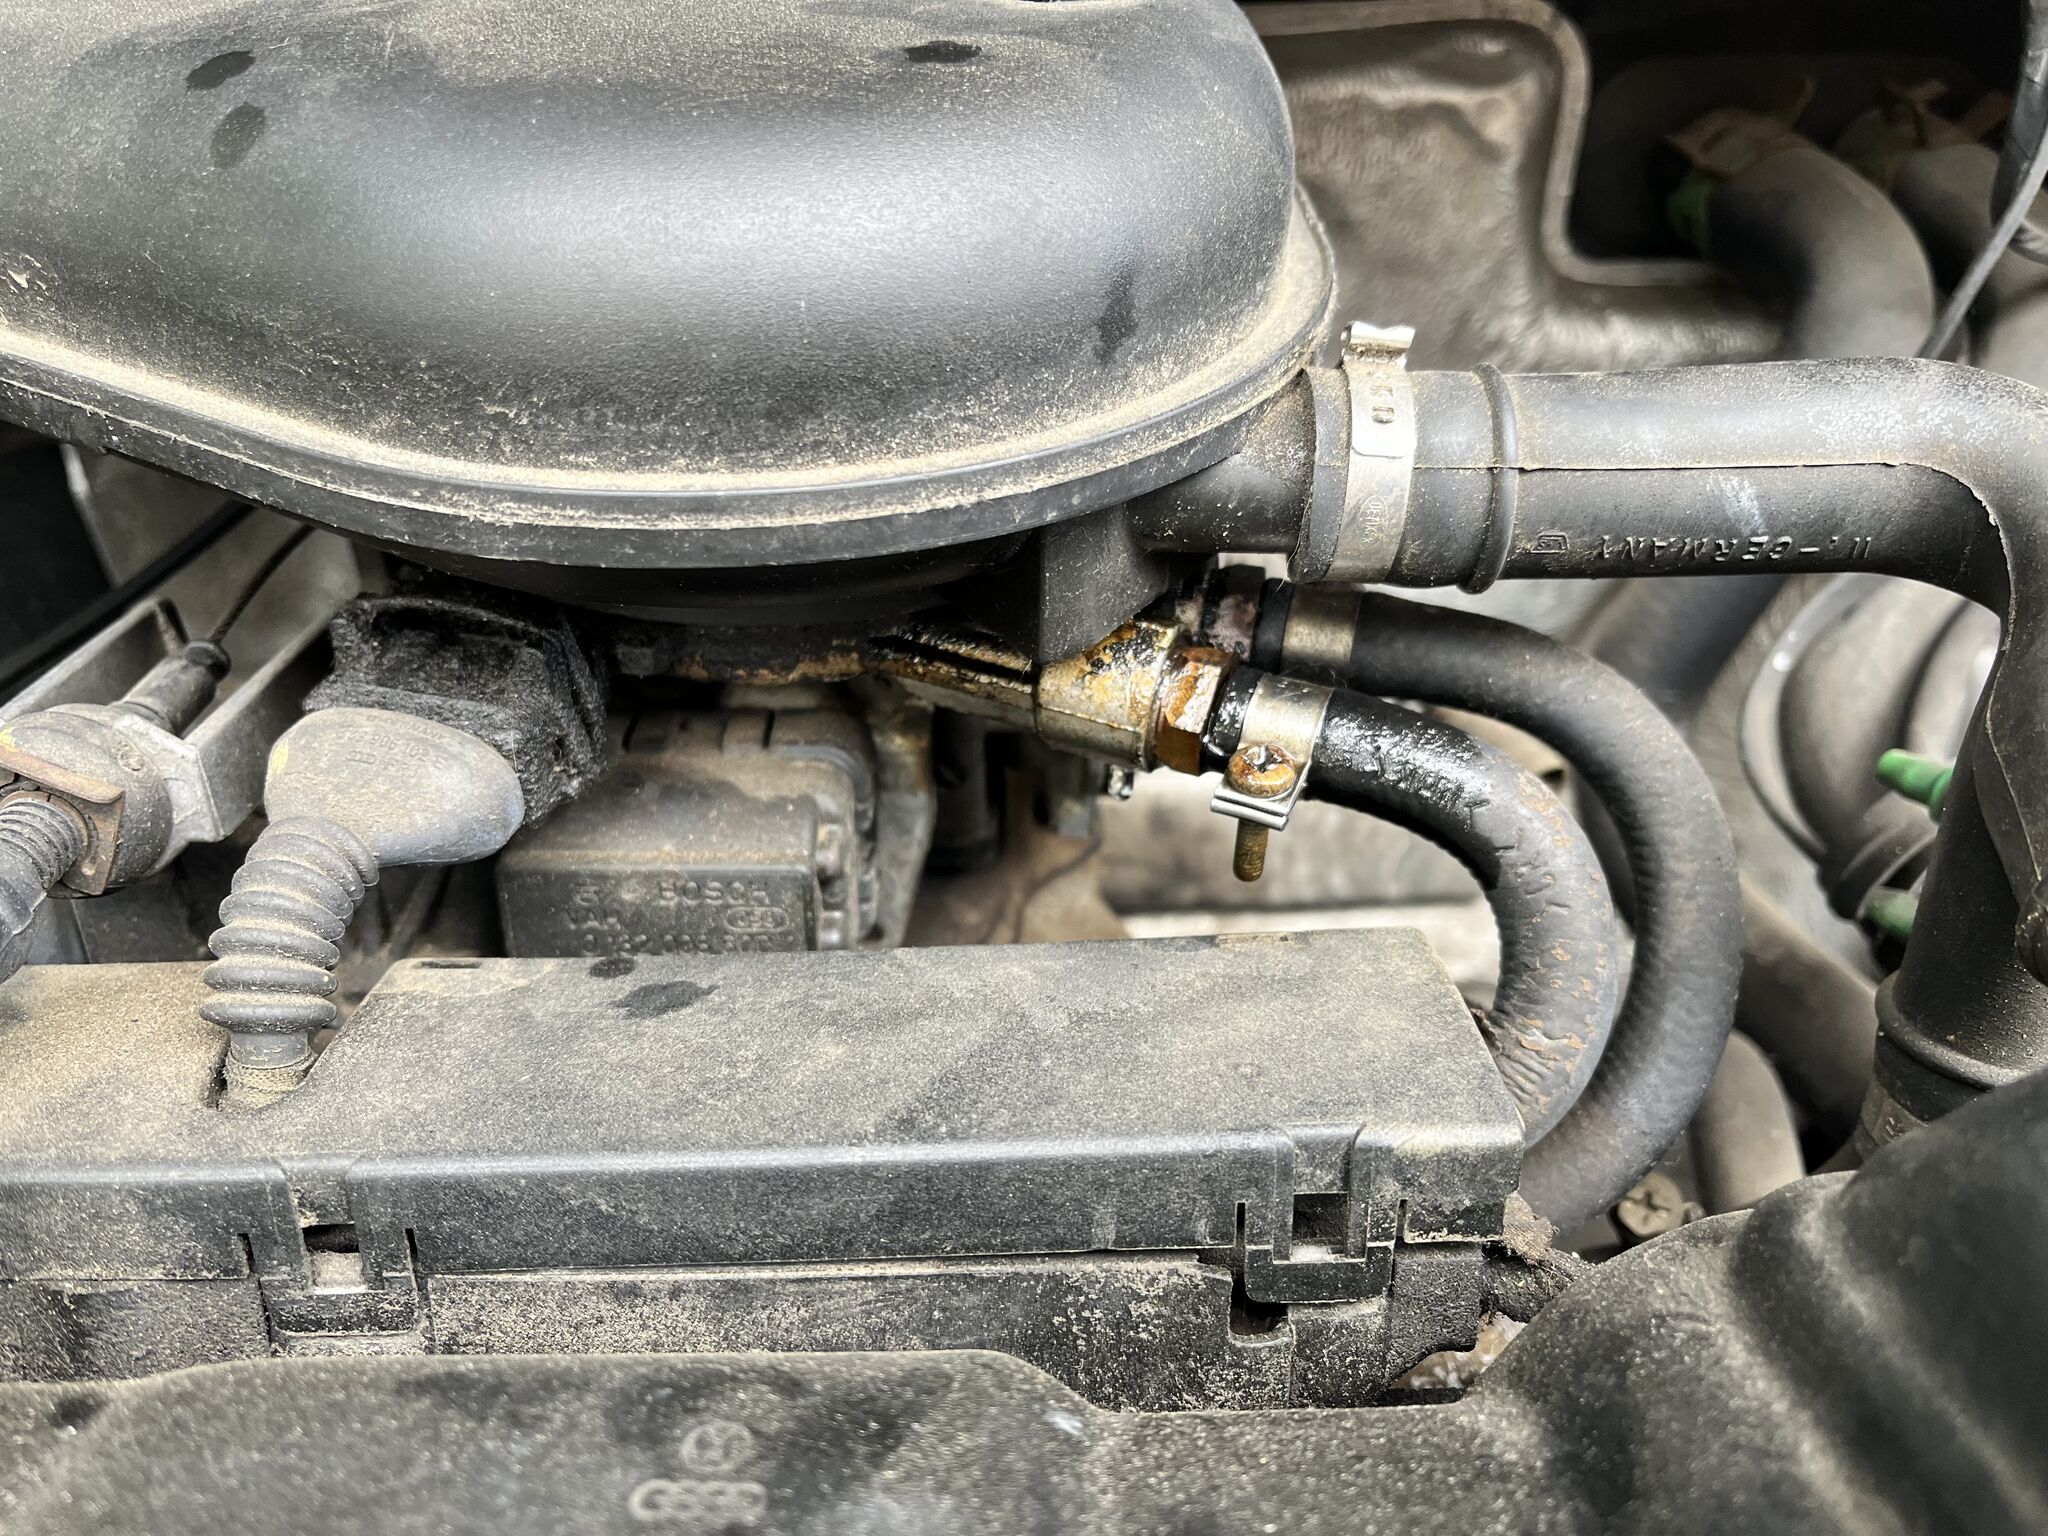 Easy fix, fuel supply hose not tightend properly